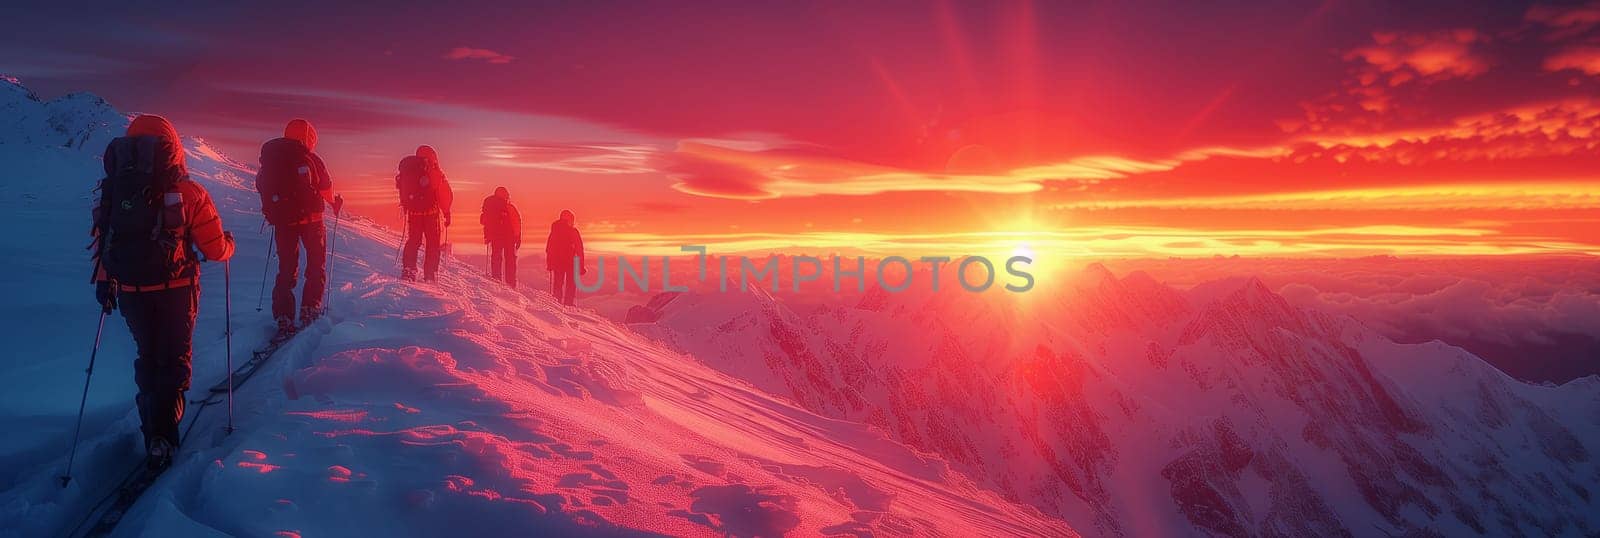 A group walking on a snowy hill under an orange afterglow sky at dusk by richwolf